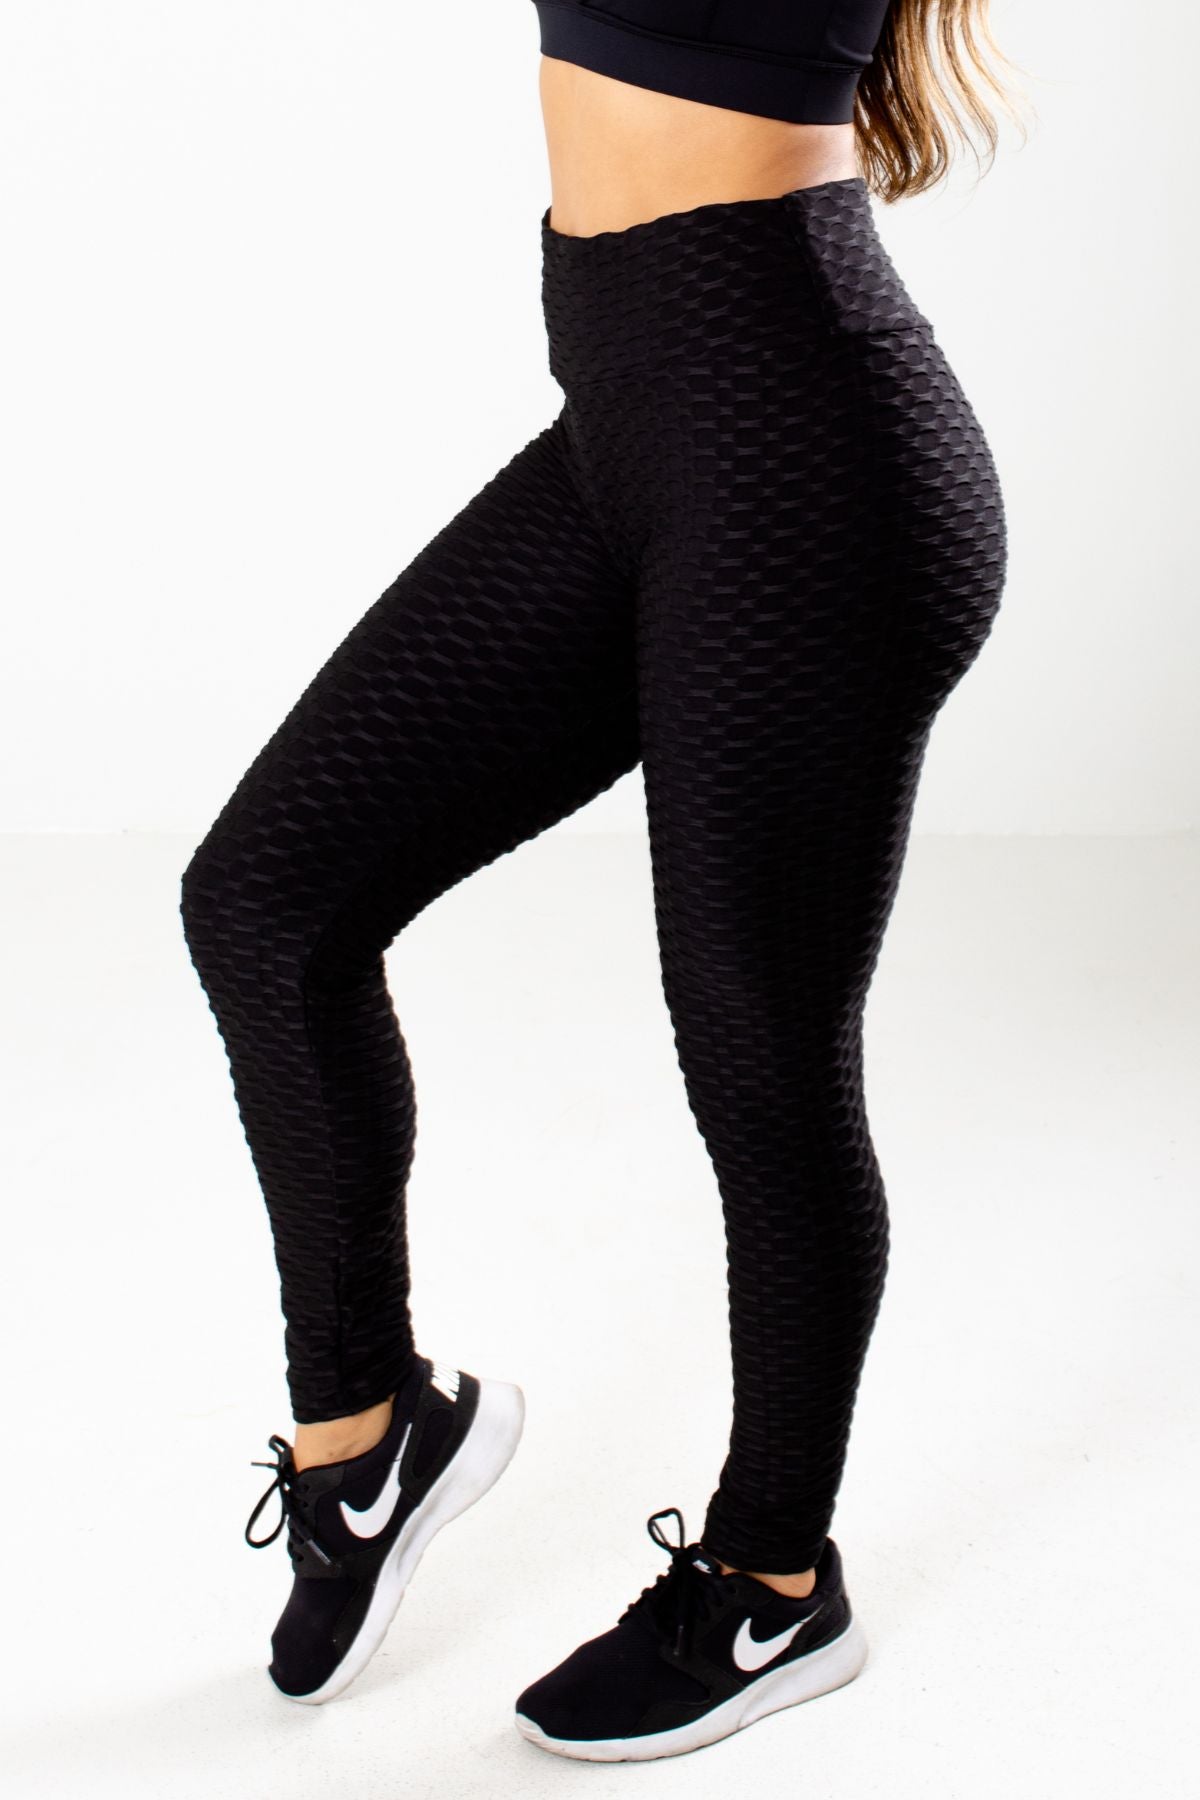 Women's slimming leggings BELLA with a Push-Up & Taille effect